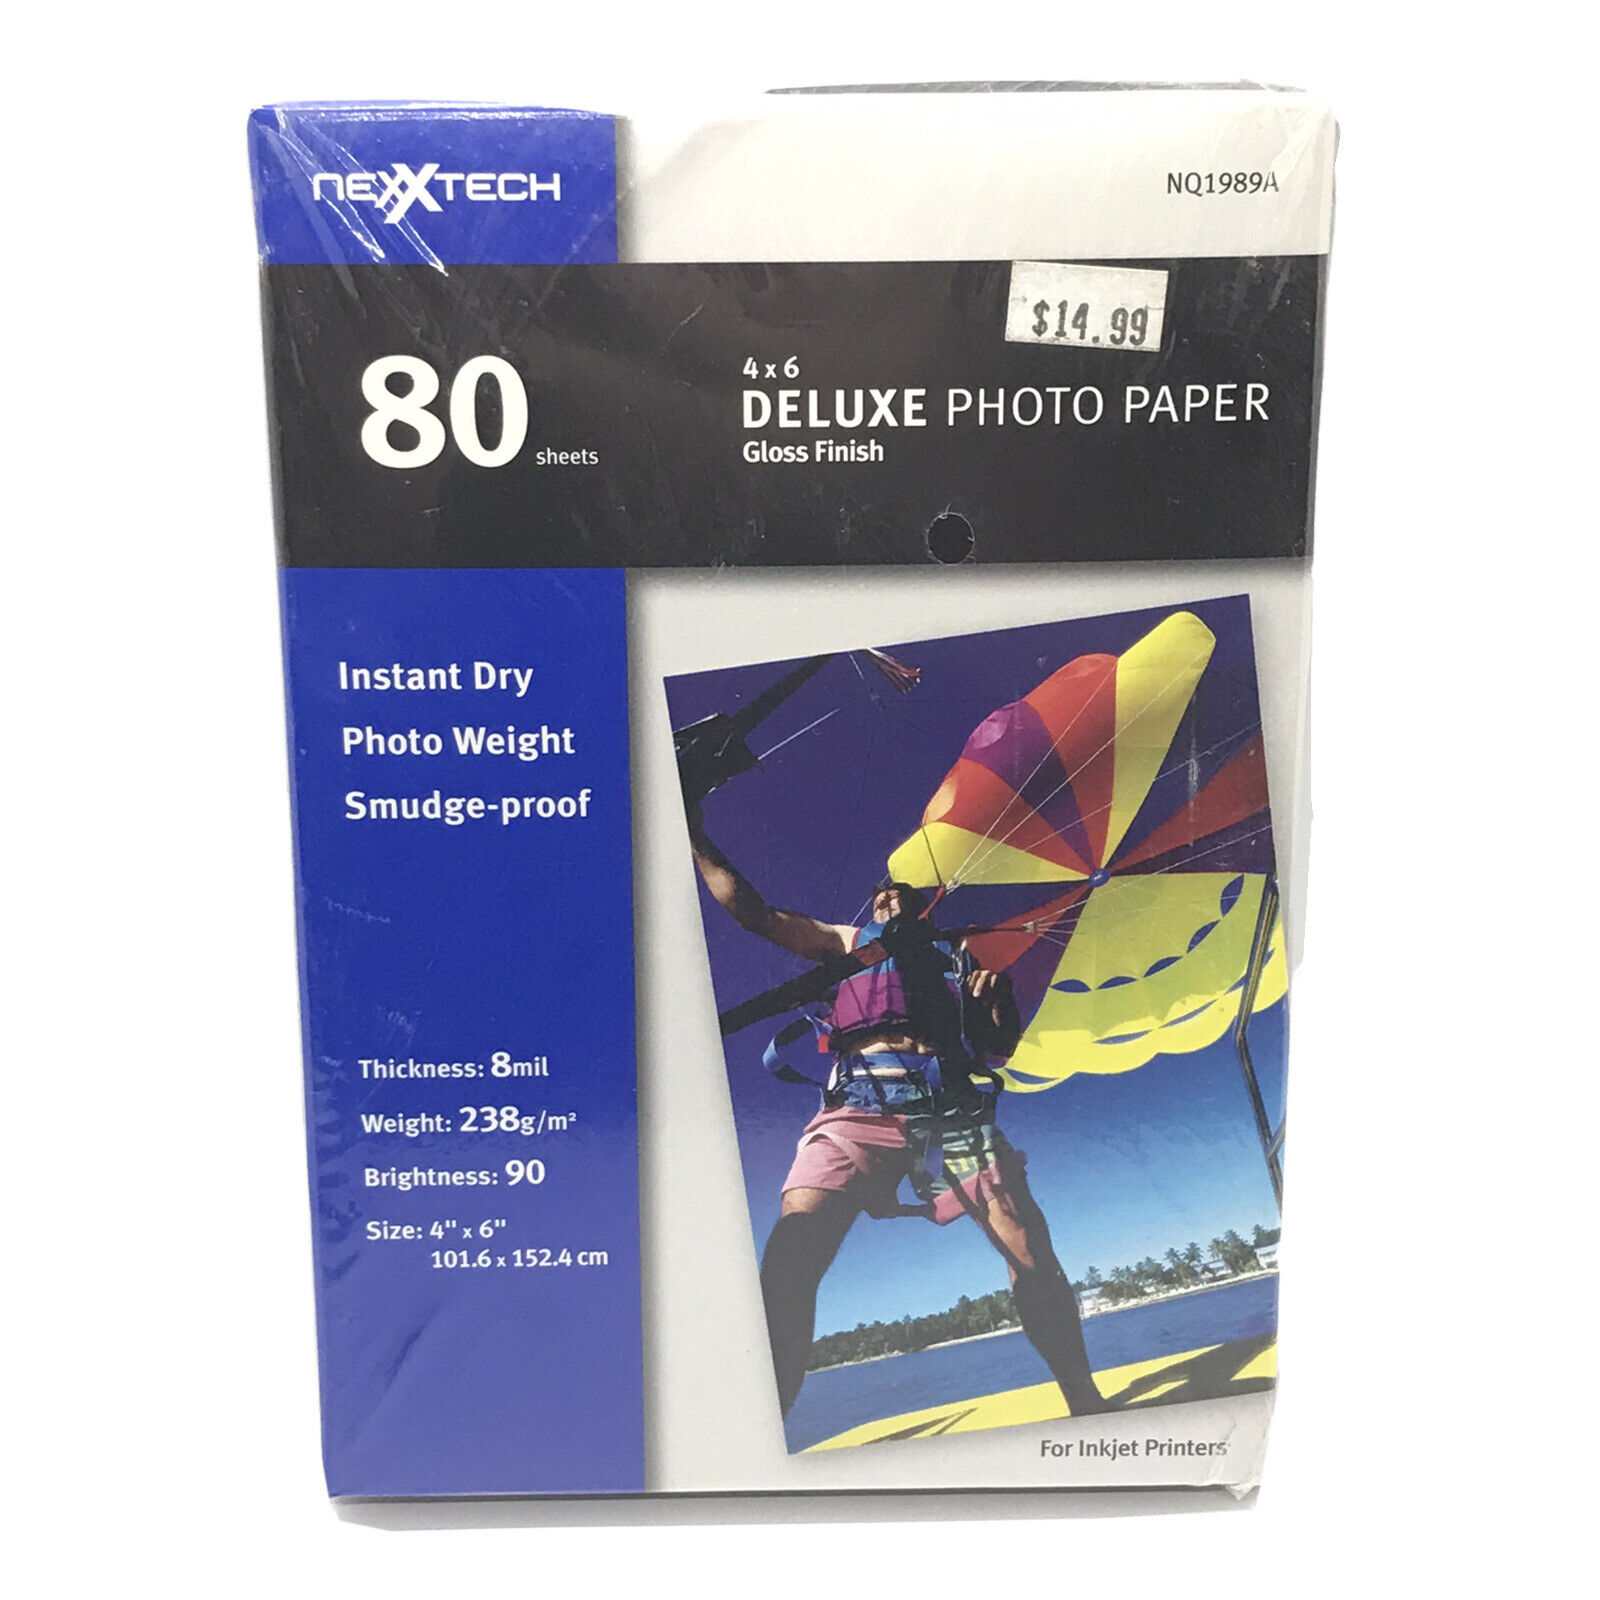 NexxTech 4x6 Deluxe Photo Paper Gloss Finish 80 Sheets ~ NQ1989A ~ New & Sealed